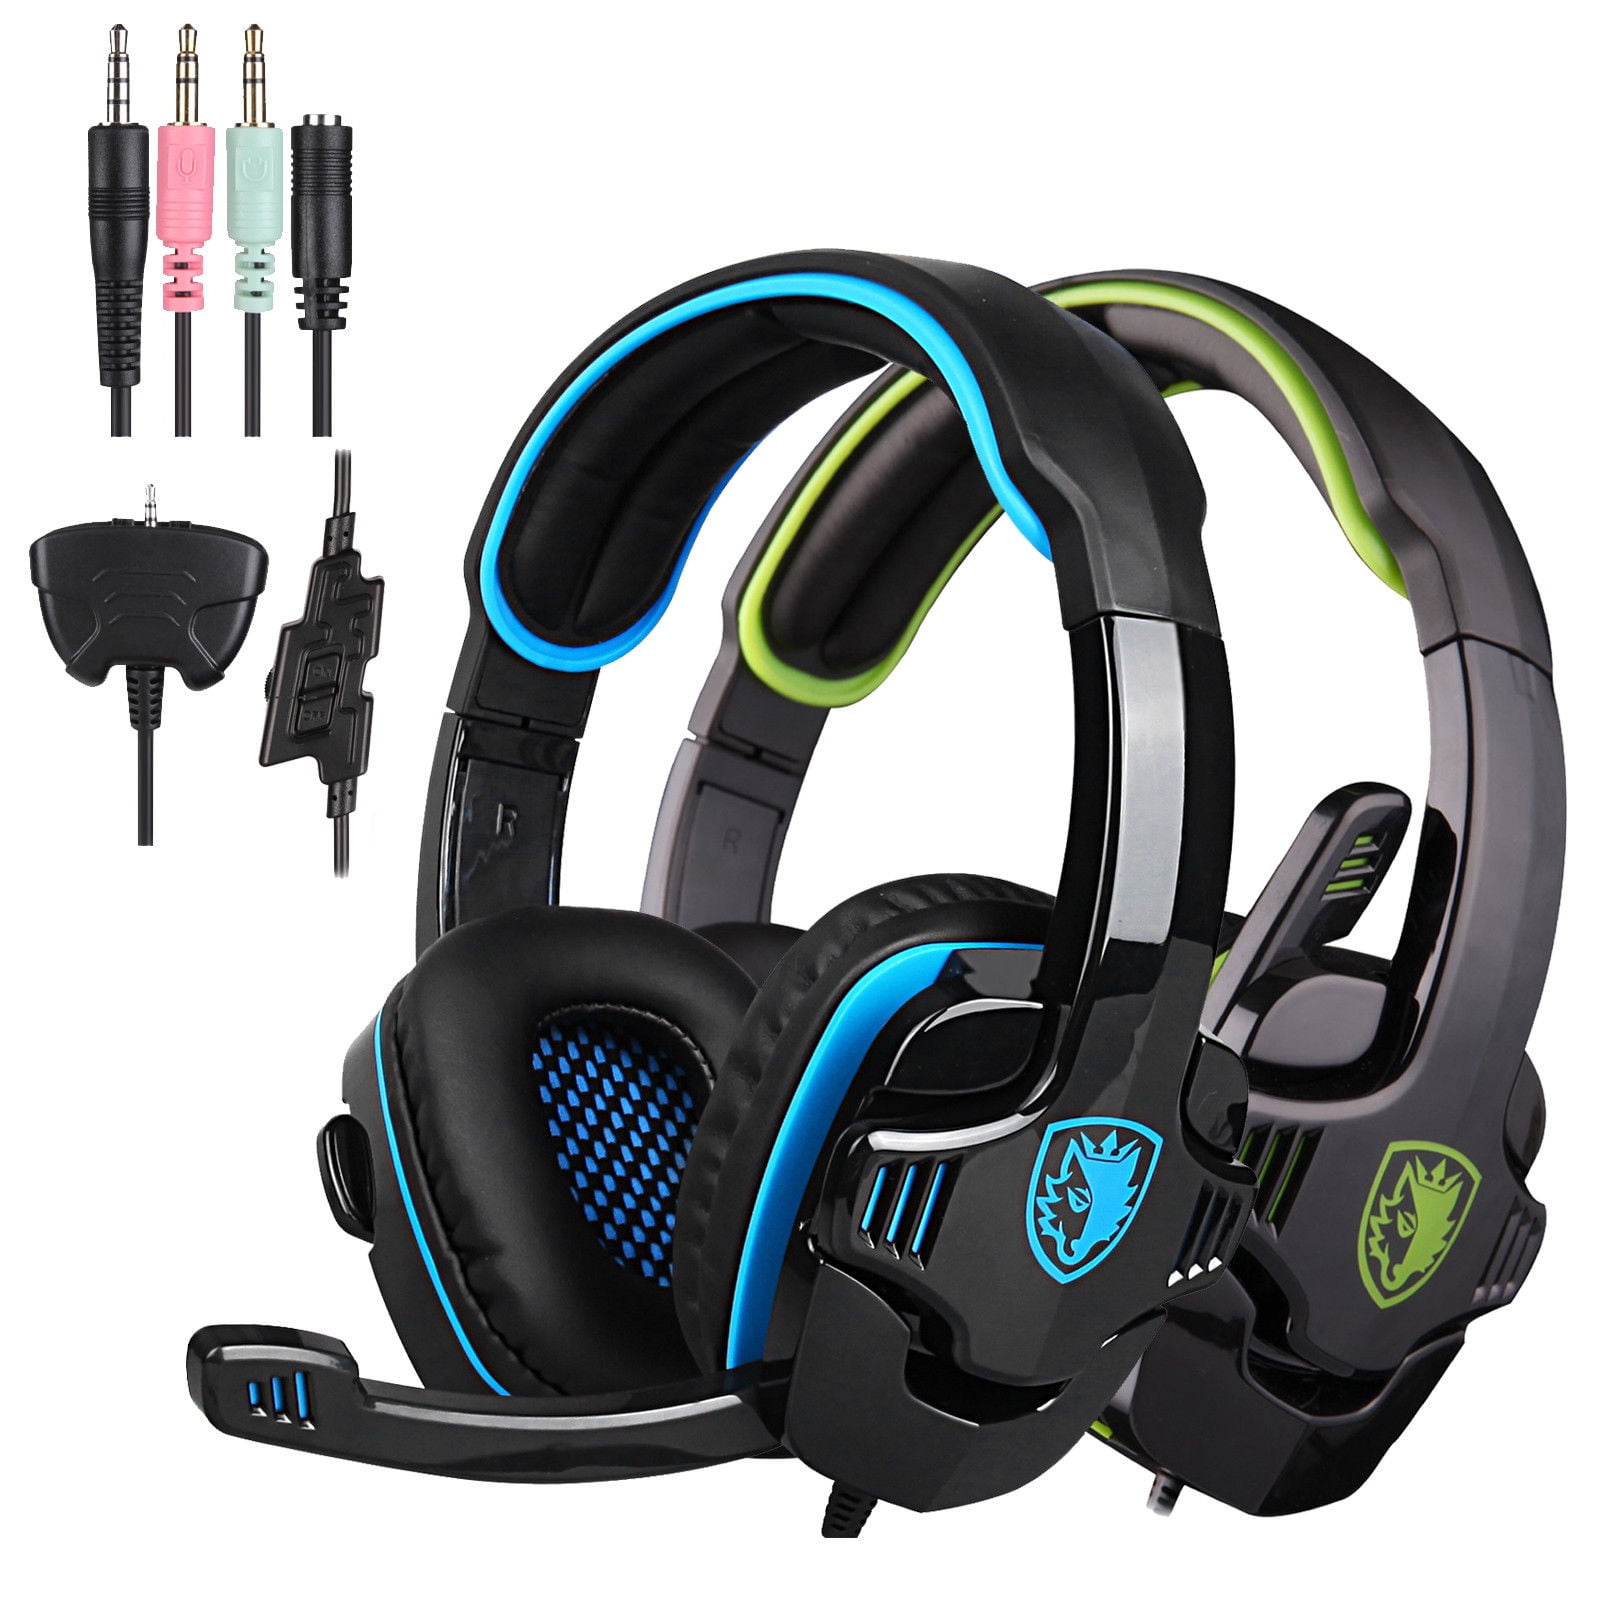 Gaming for Mac SmartPhone HiFi SA-708 GT Stereo Headset PS4 Xbox360 Laptop(Green) iPhone PC with SADES Microphone Headphone